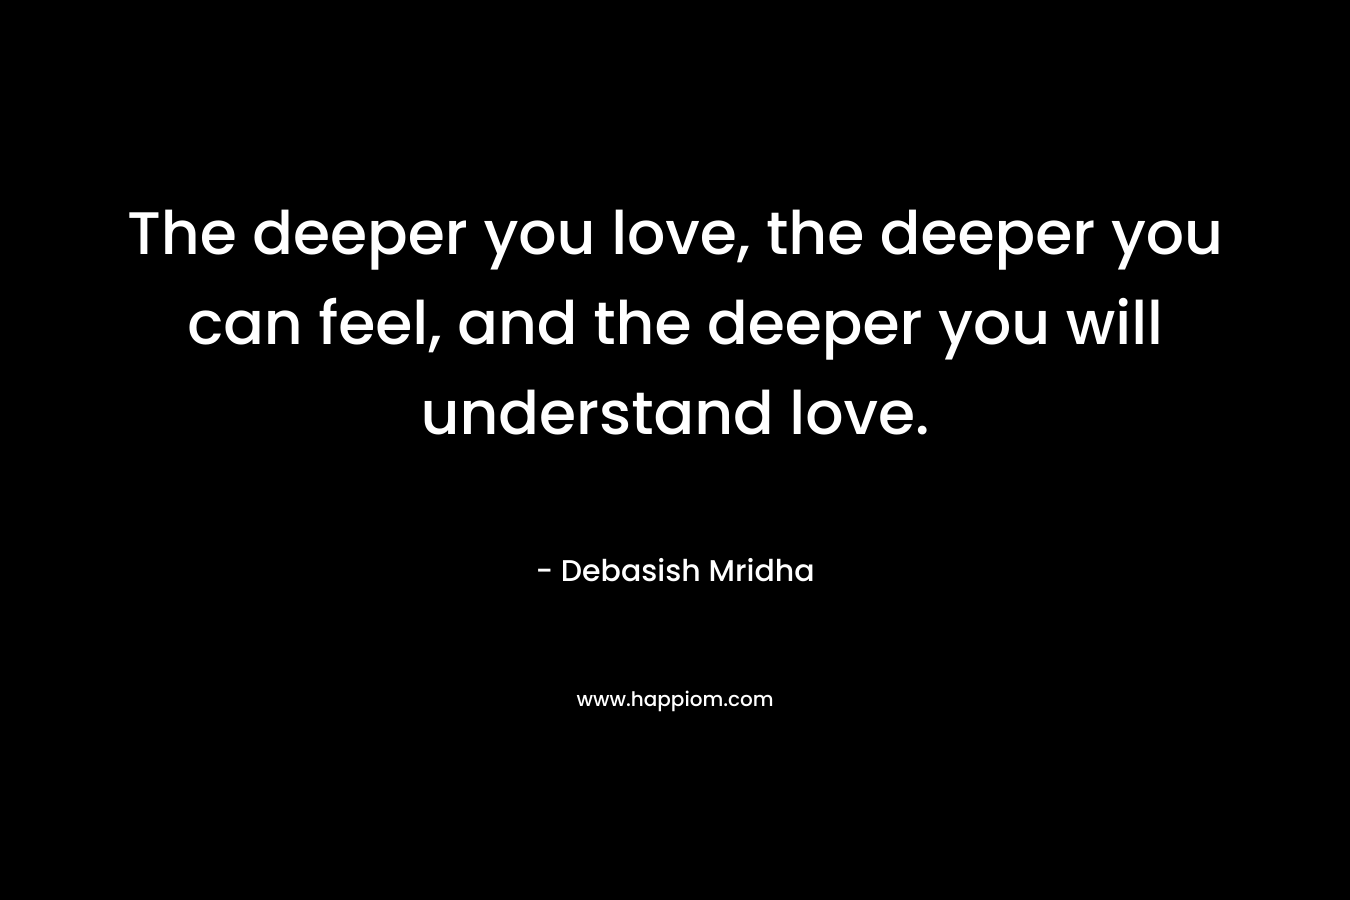 The deeper you love, the deeper you can feel, and the deeper you will understand love.